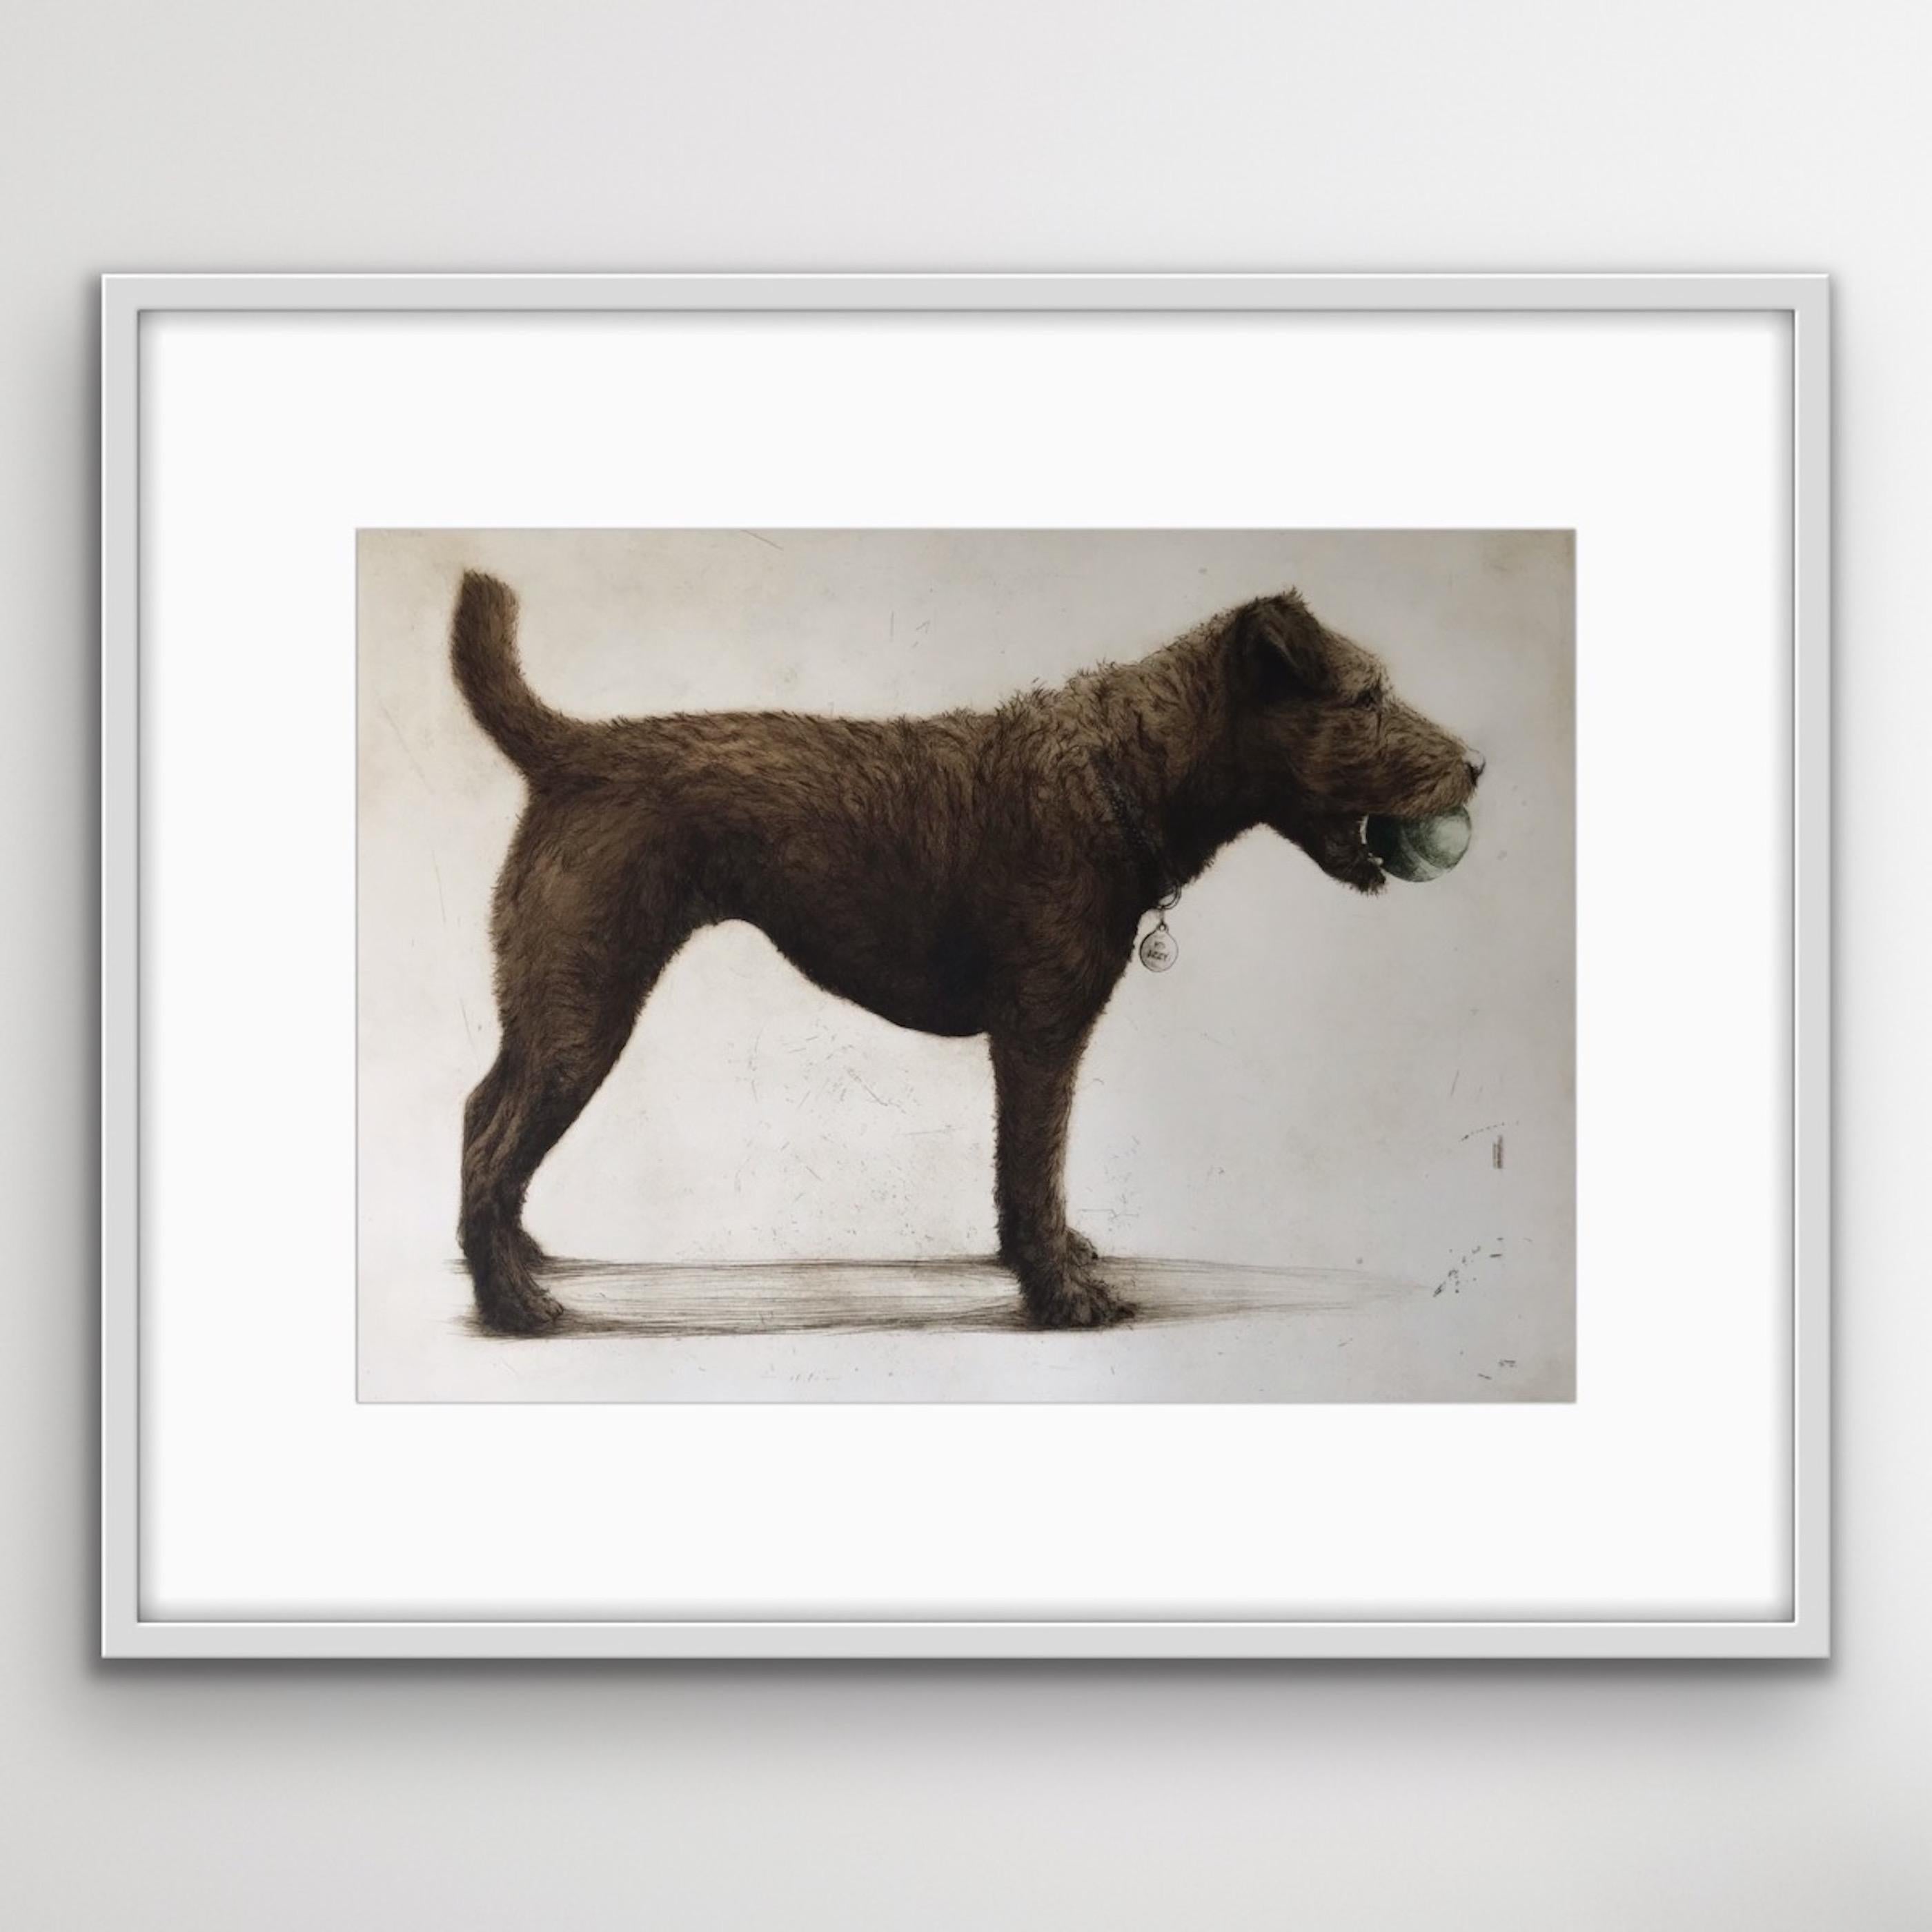 Izzy, a charming characterful terrier stands alert, holding her ball in her mouth. Colour etching hand made and printed by the artist.
Helen Fay's art for sale online and in our gallery at Wychwood Art. Animals have always been at the heart of my